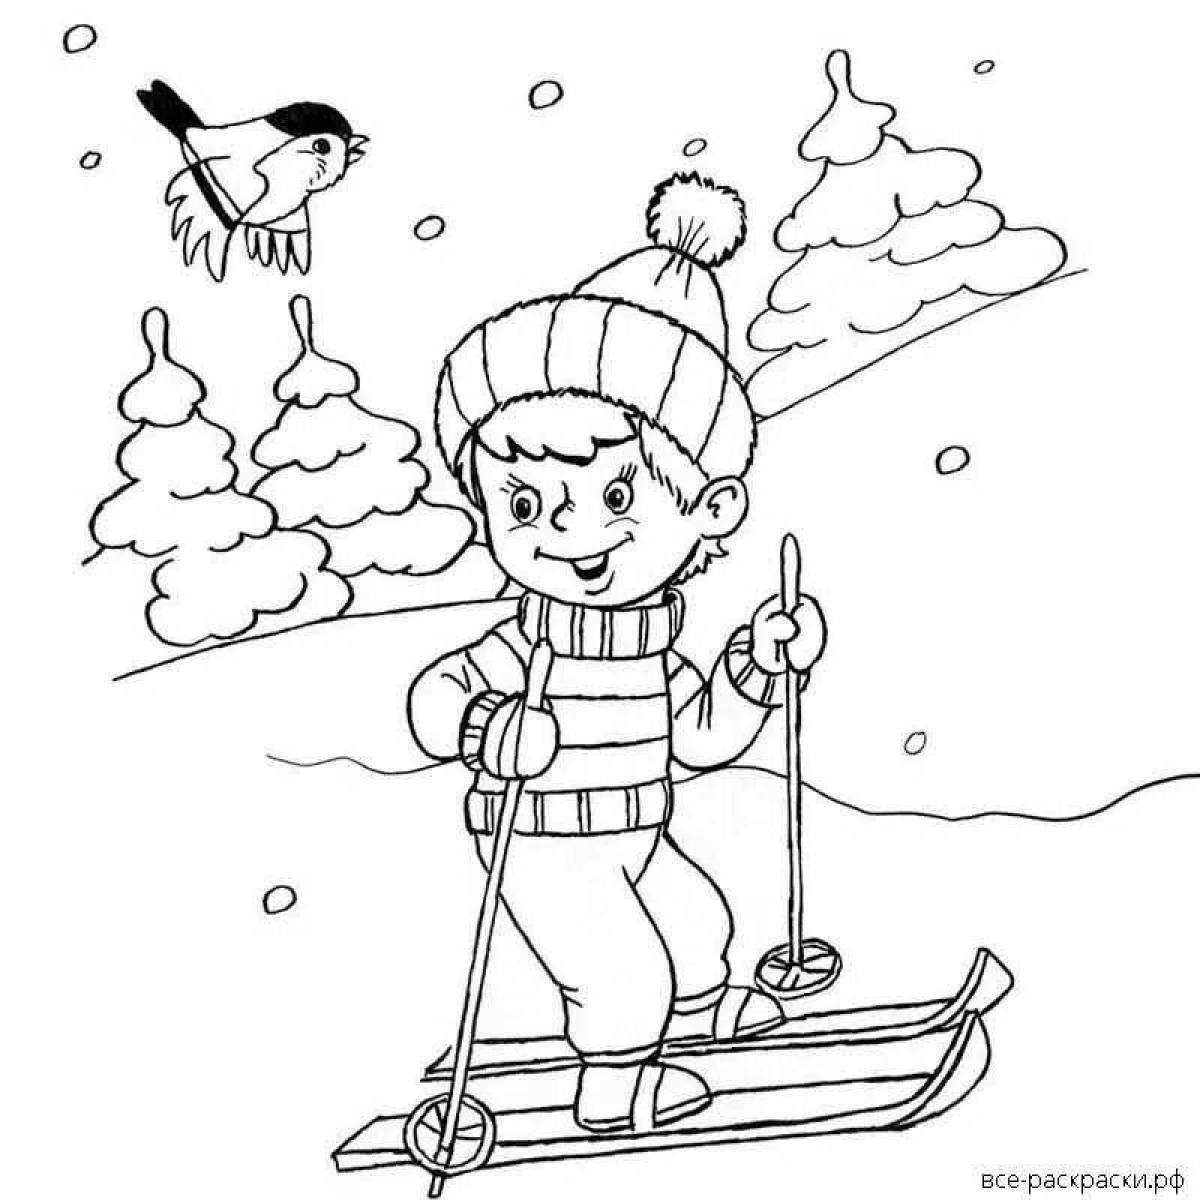 Glitter winter sports coloring pages for kids